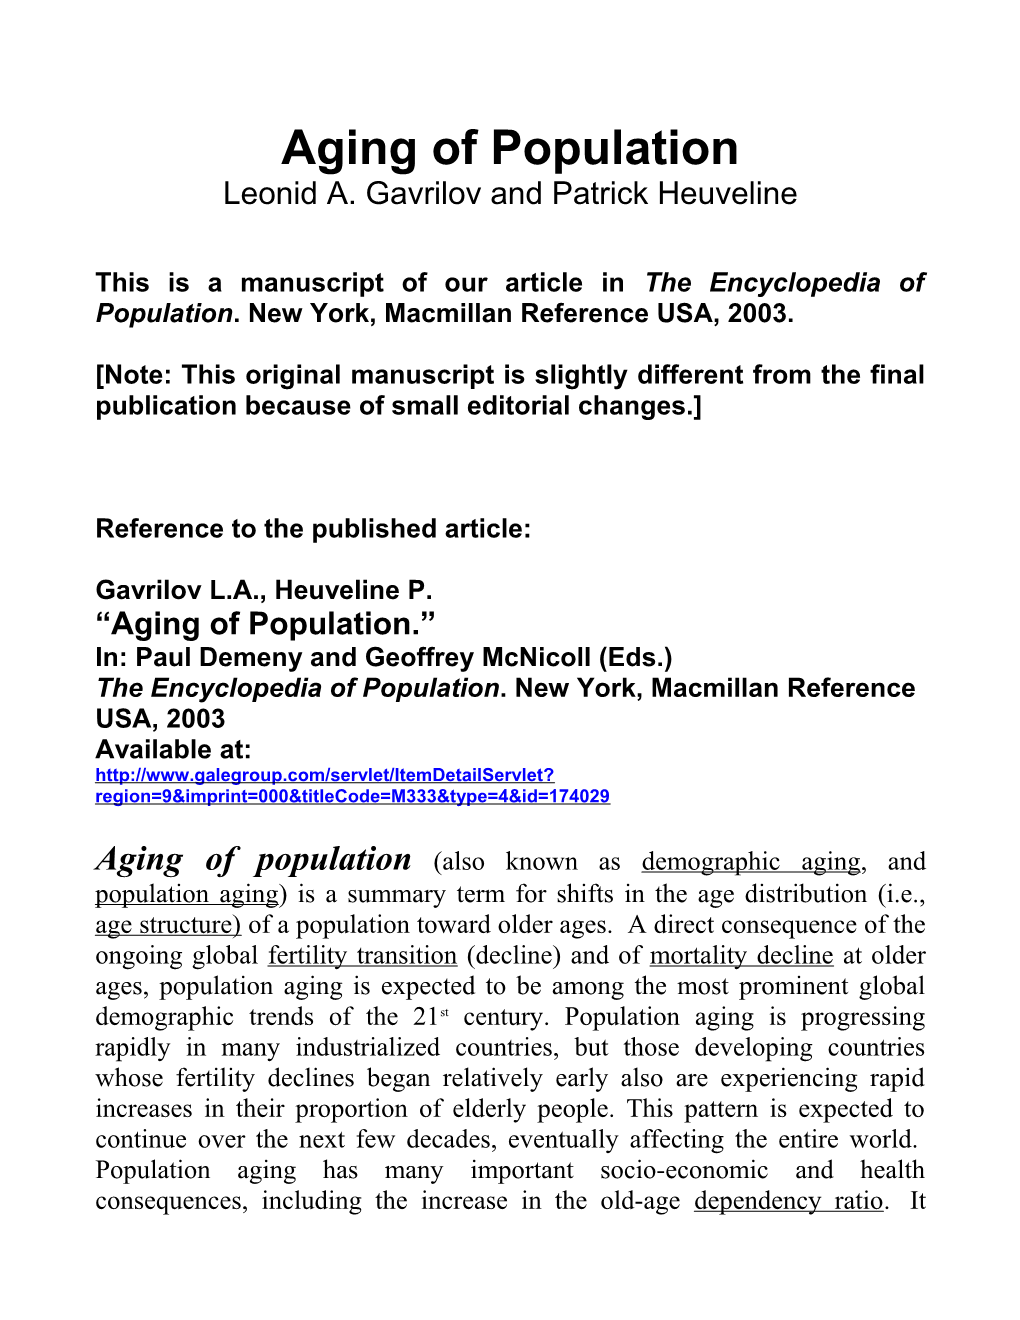 Aging of Population